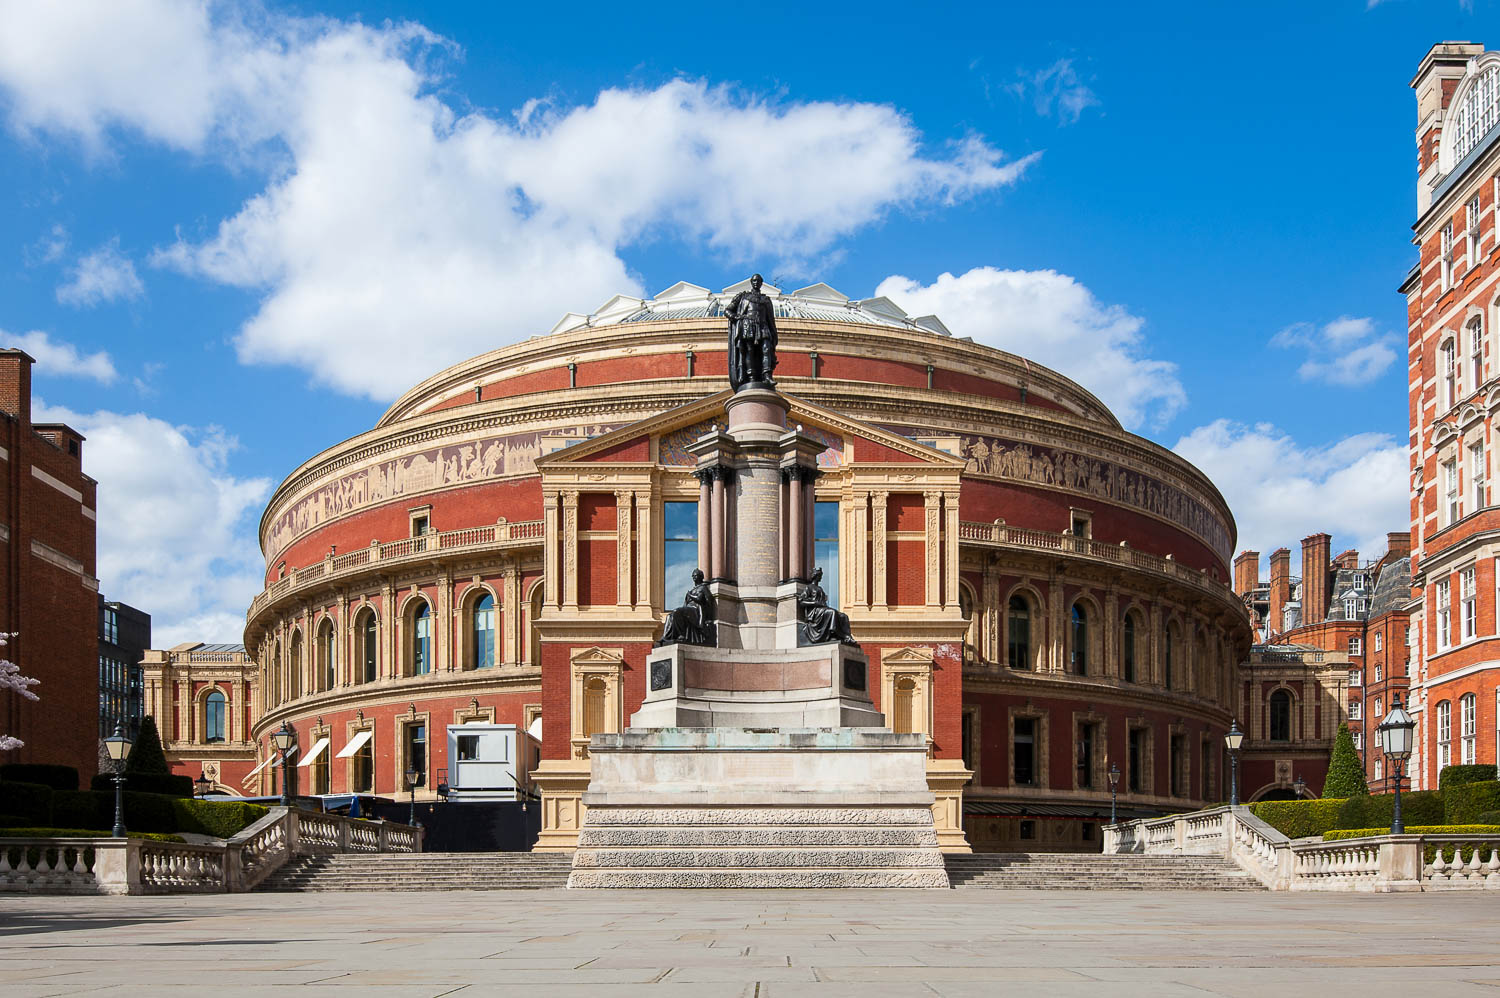 London's Royal Albert Hall in South Kensington - if you're wondering where to see Santa in London, the venue often has storytelling as part of the Christmas programme